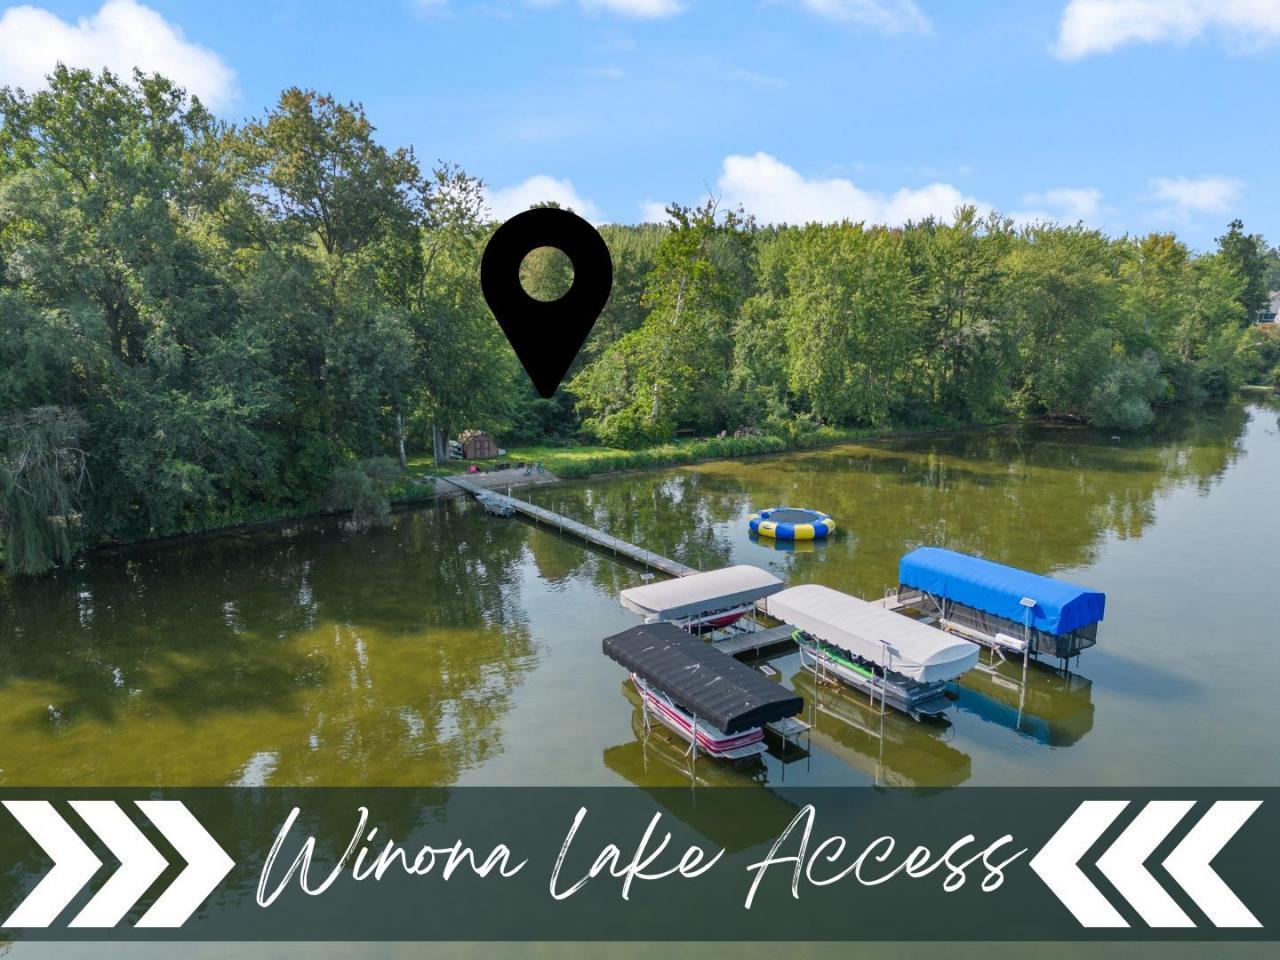 5 Stone Camp Trail, Winona Lake, Indiana, 46590, United States, 6 Bedrooms Bedrooms, ,5 BathroomsBathrooms,Residential,For Sale,5 Stone Camp Trail,1337356